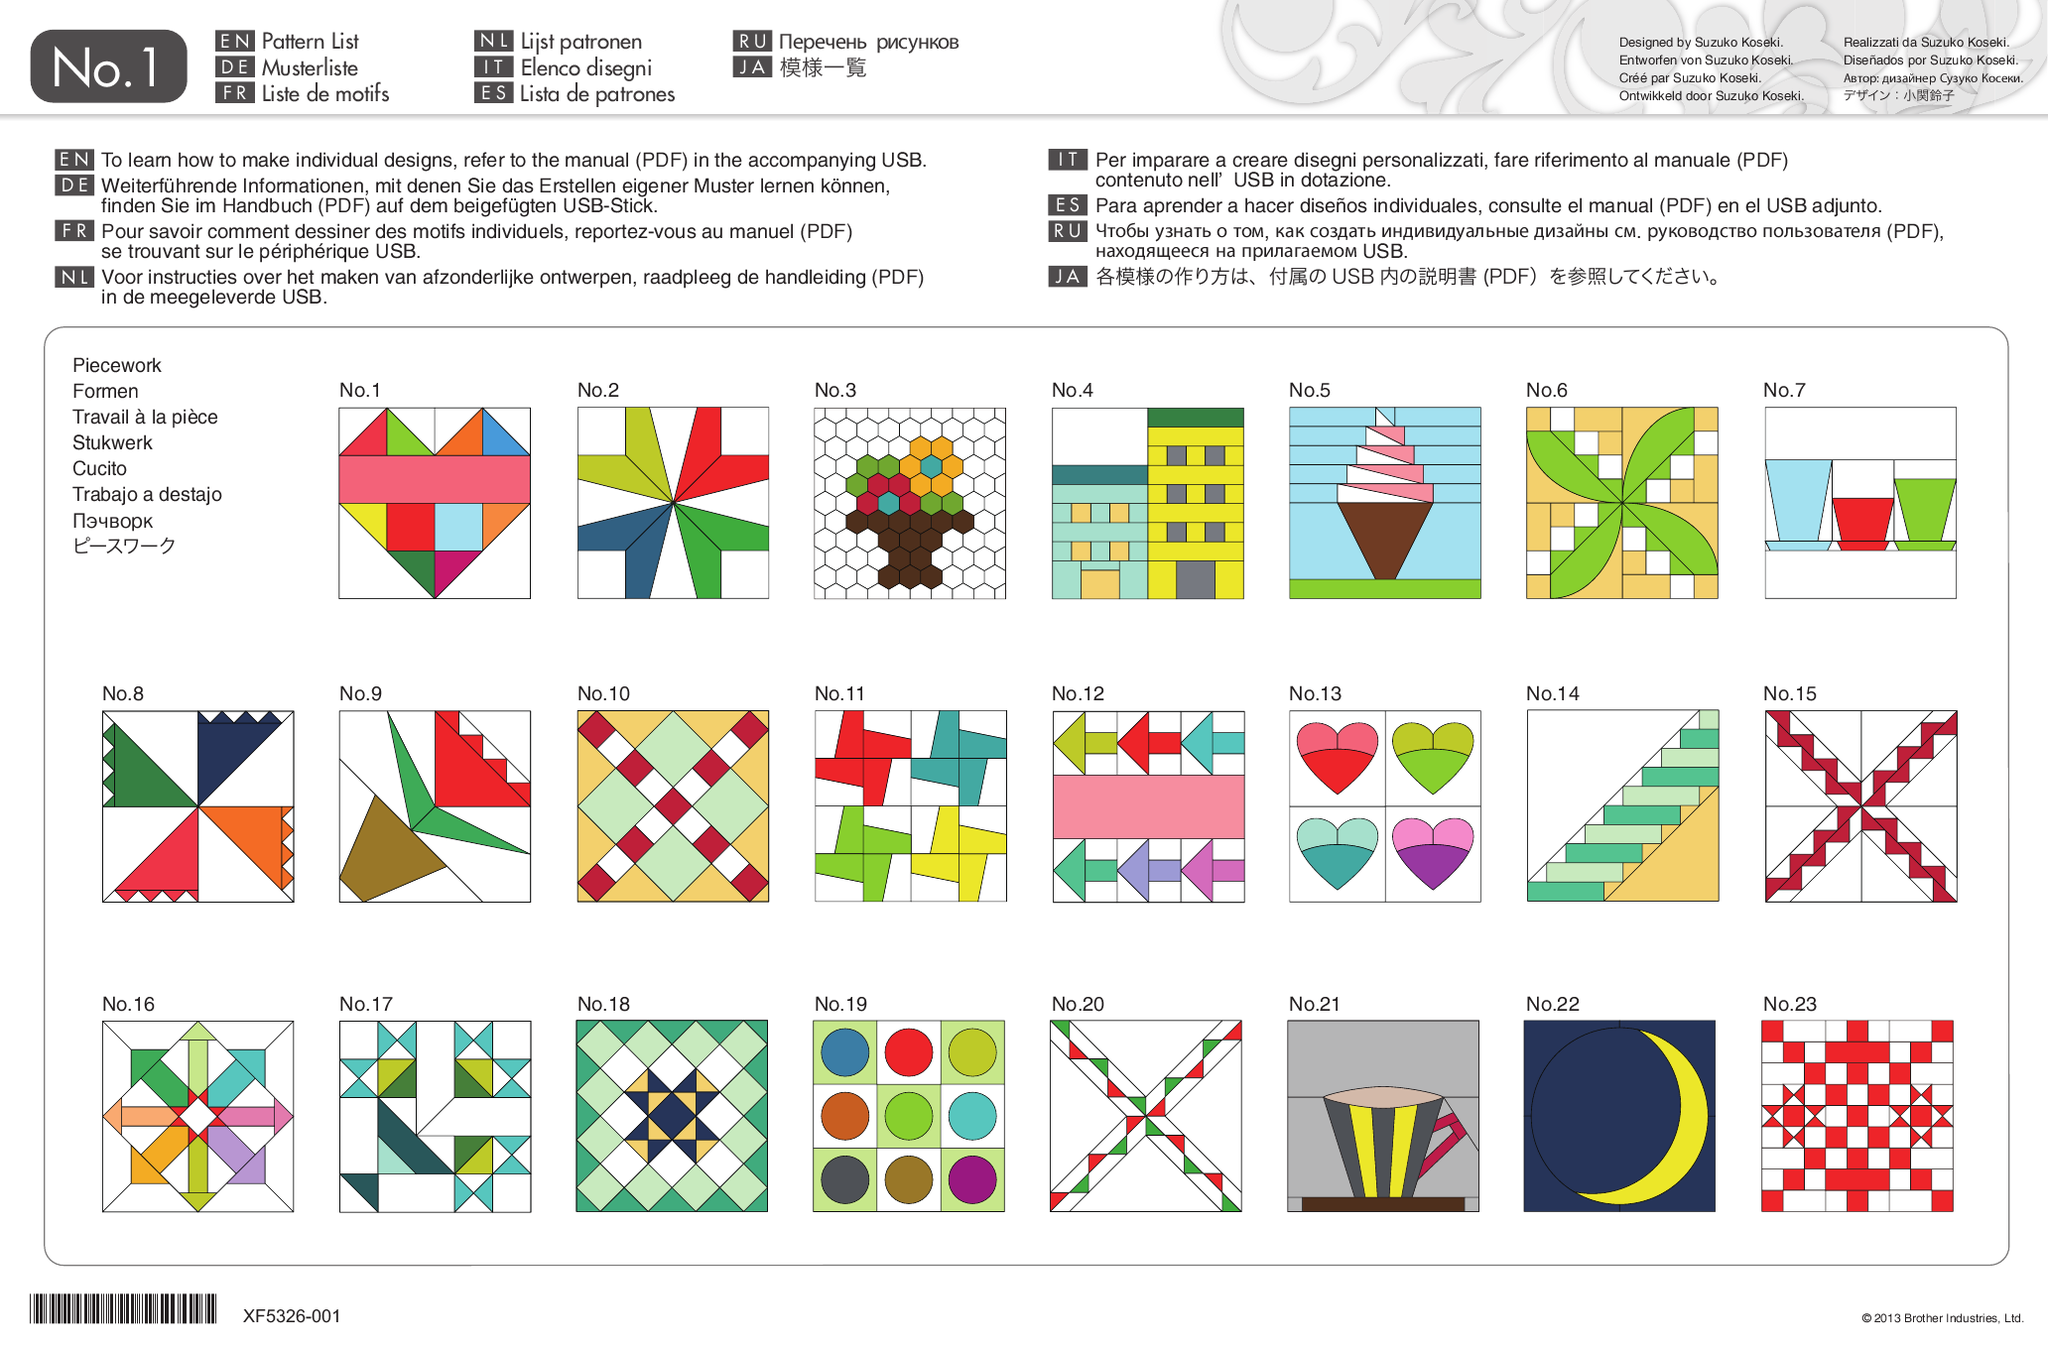 causb1-patternlist1.yv.com.hk_efcd1b82-465b-4e88-b7c9-0a7515f55c24.png